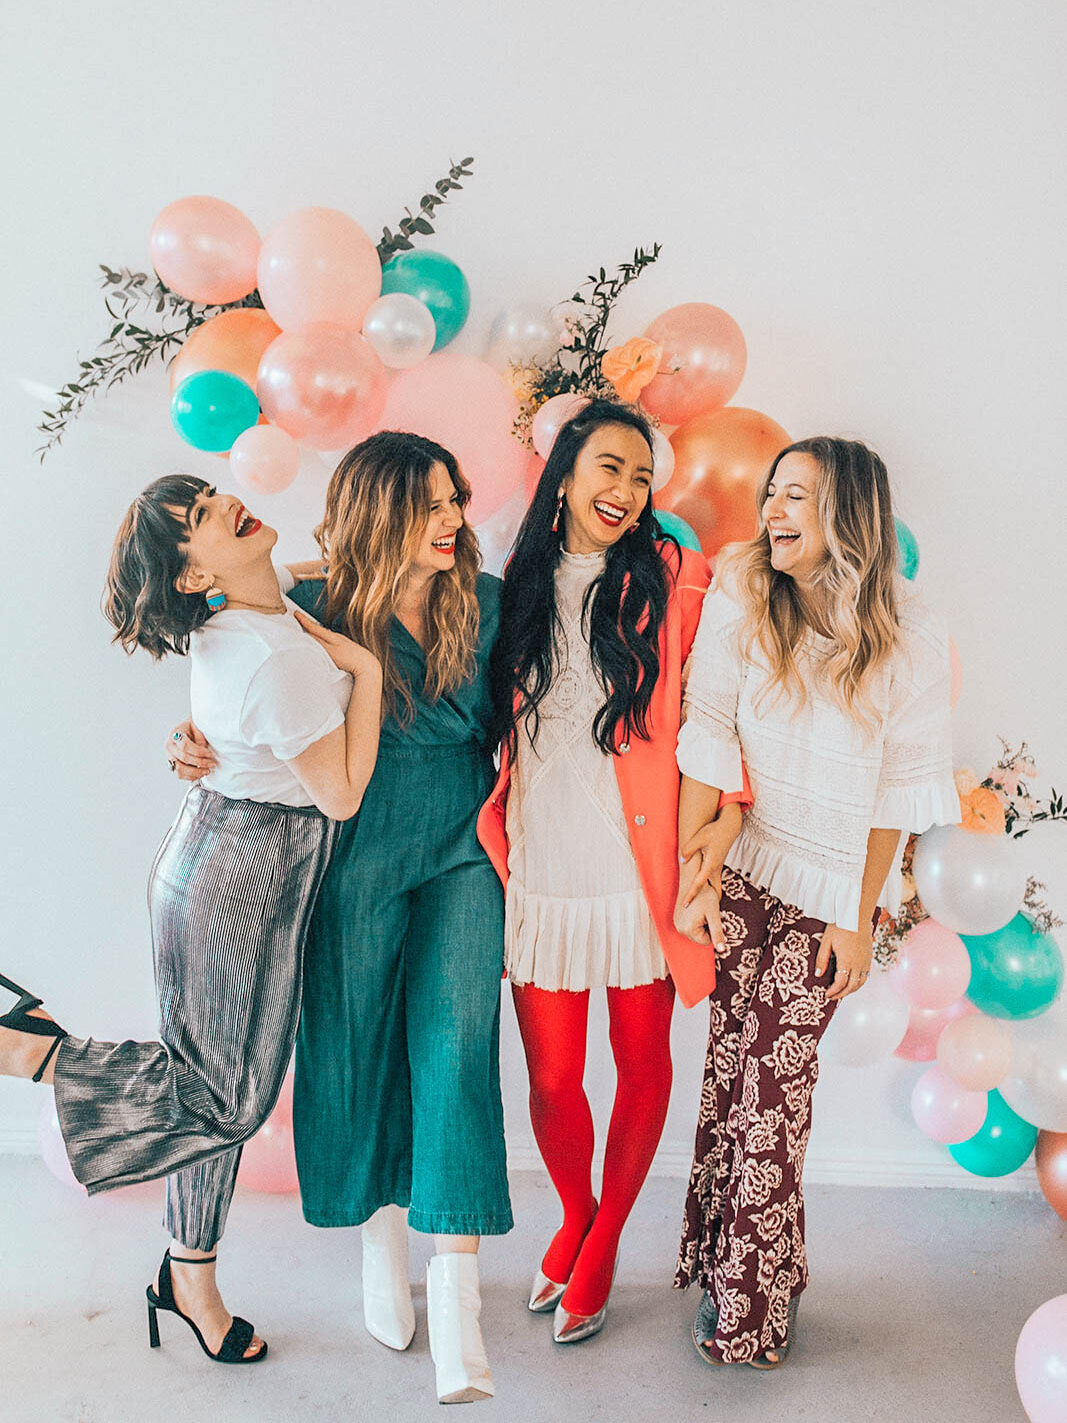 How to throw the best Galentine's Day party